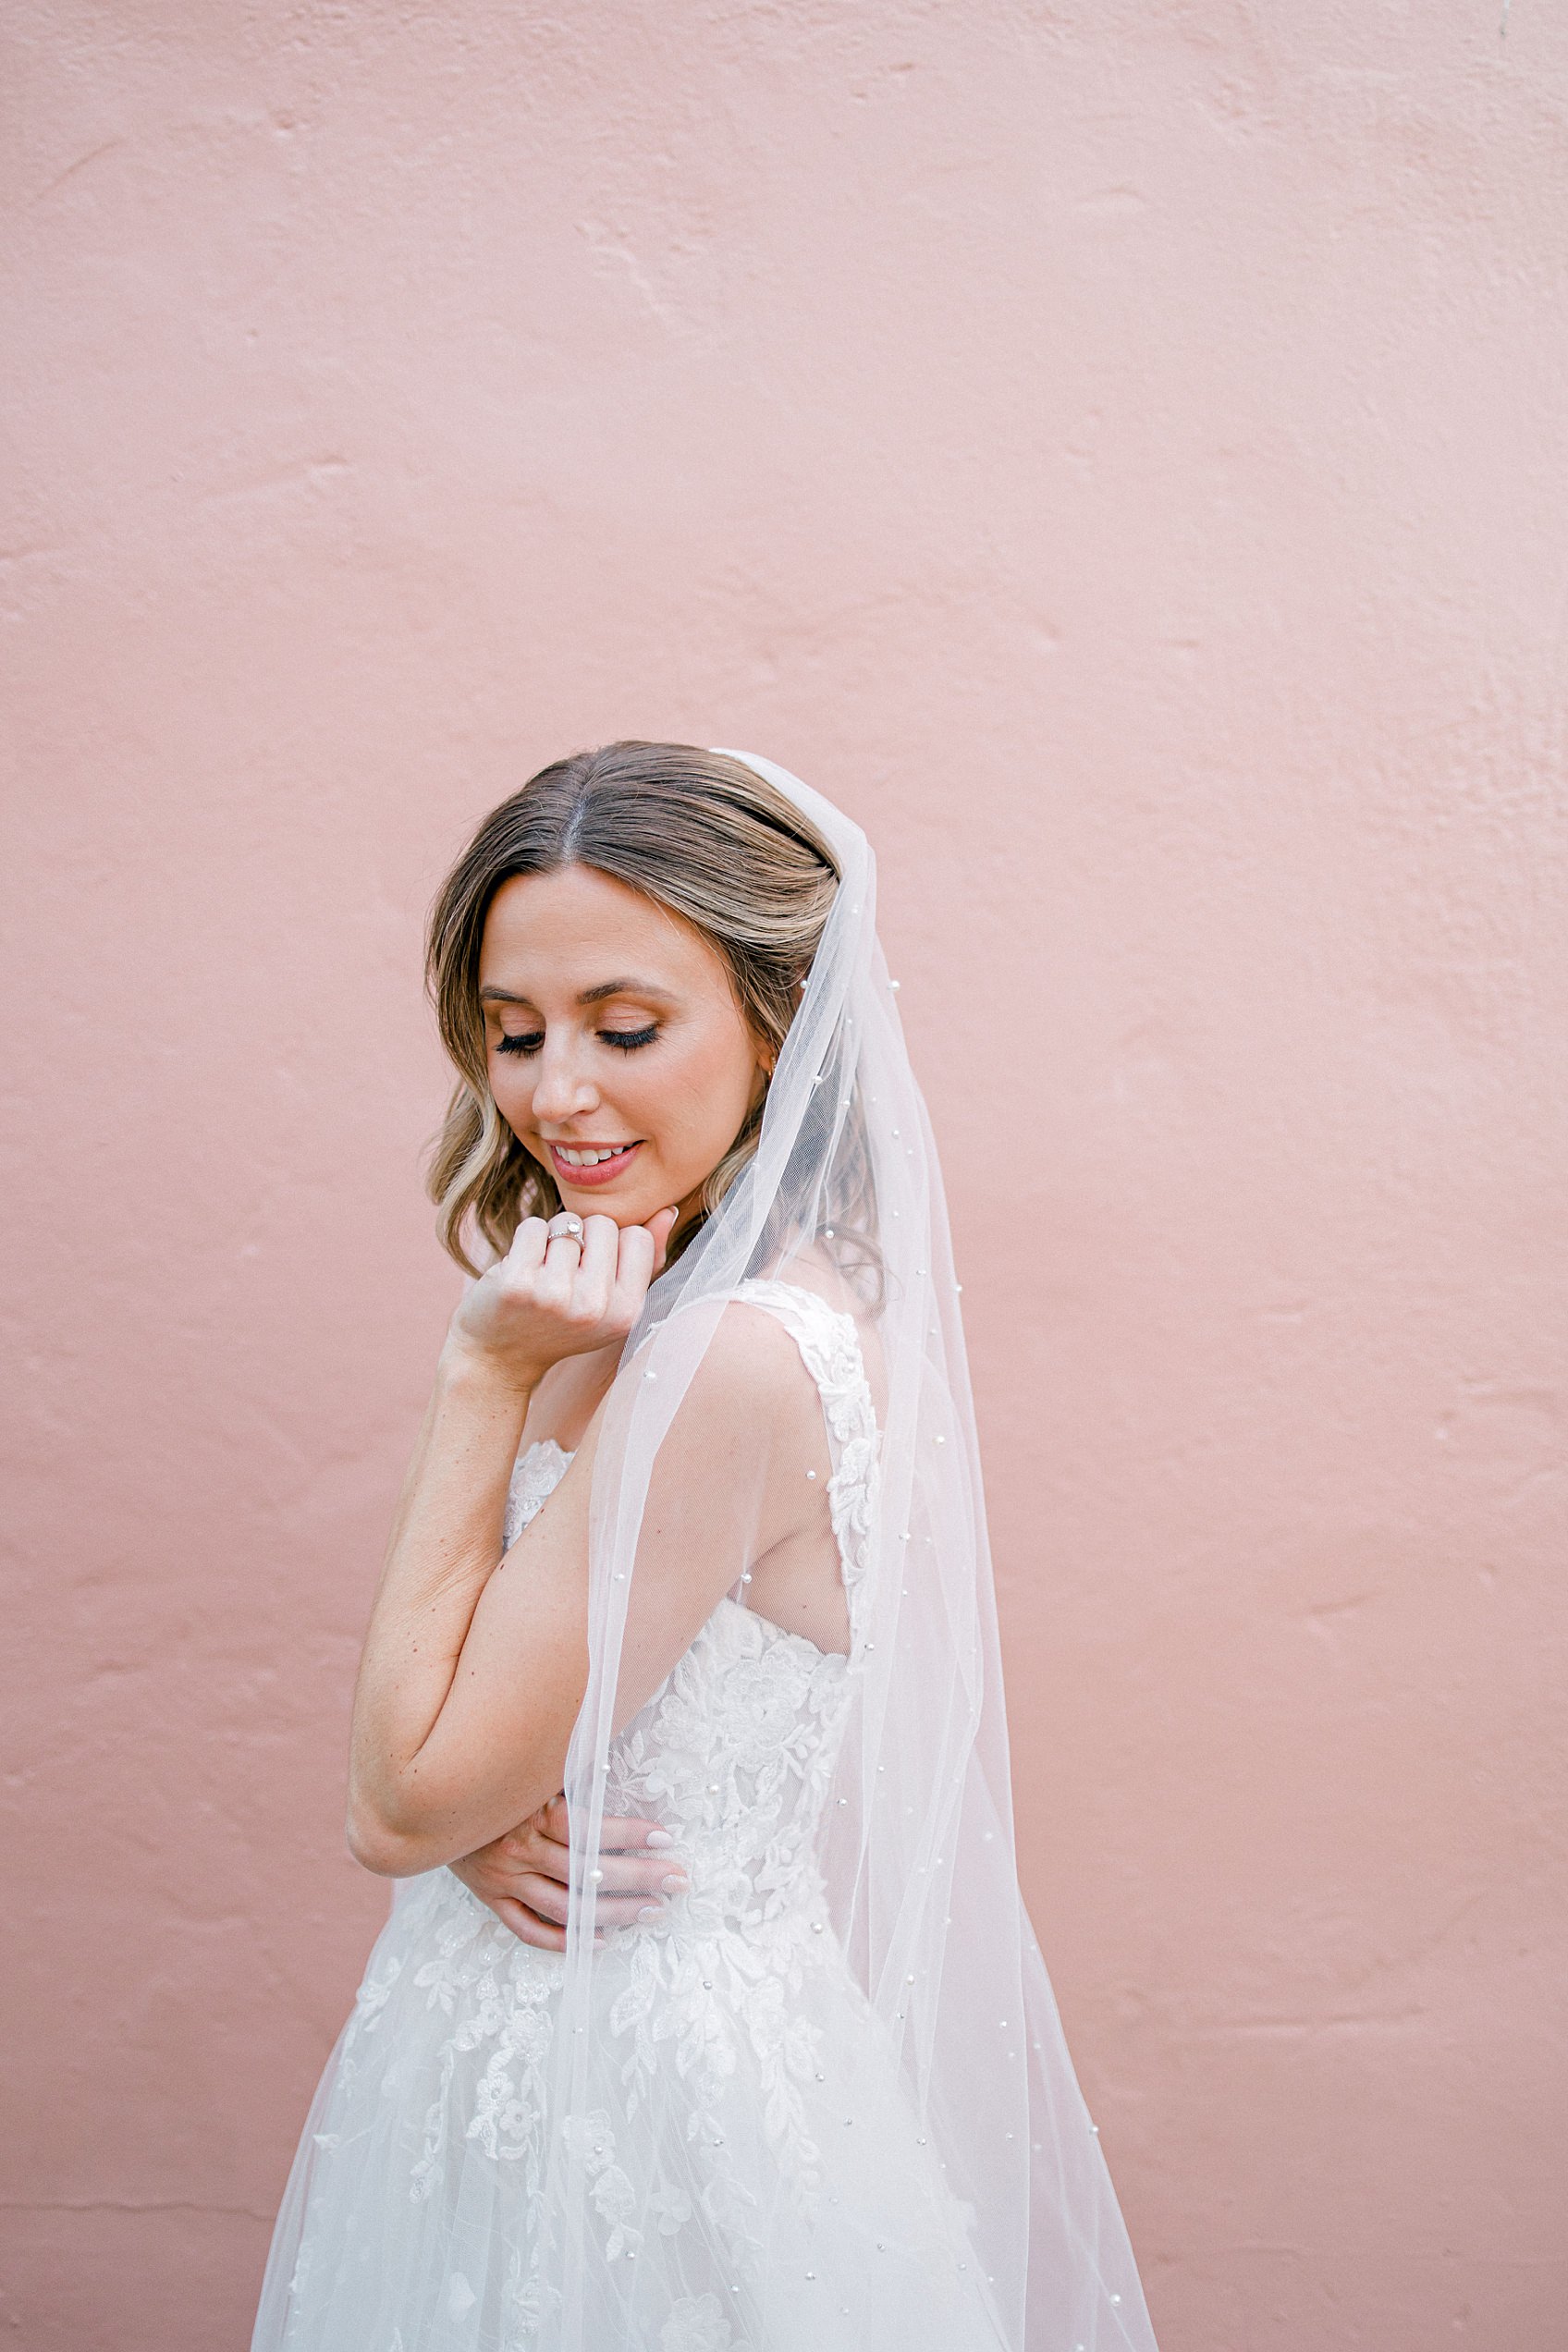 Downtown San Antonio Bridal Photography Session by Allison Jeffers Wedding Photography 0041